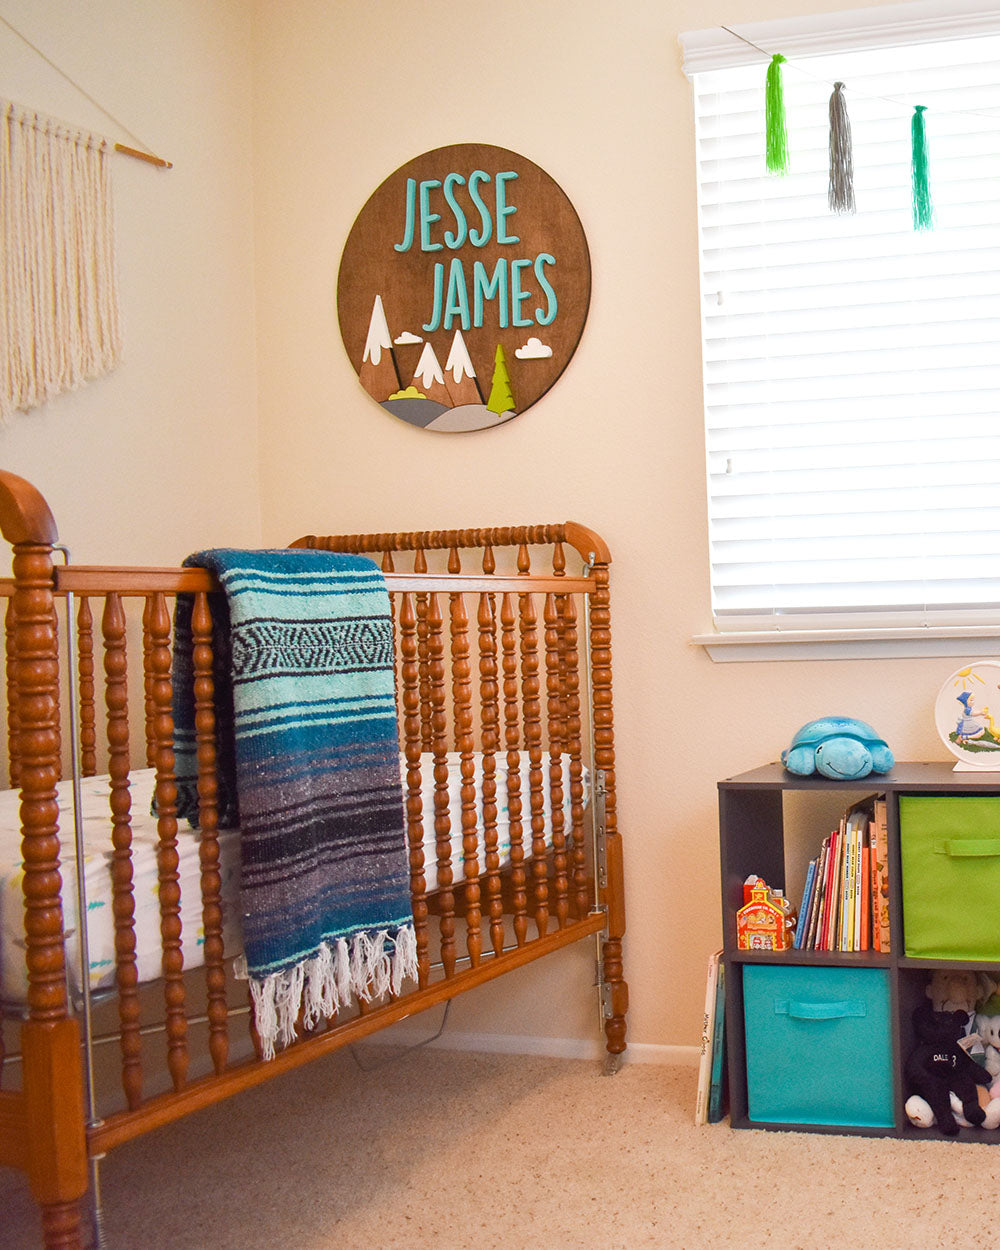 Baby JJ's adventure theme nursery wouldn't be complete with out a Bohemian Fiesta Blanket. It adds a cozy vibe to the room and comes in handy on chilly nights when I'm rocking the baby. Our little guy can take it with him on adventures as he grows older. So cute!